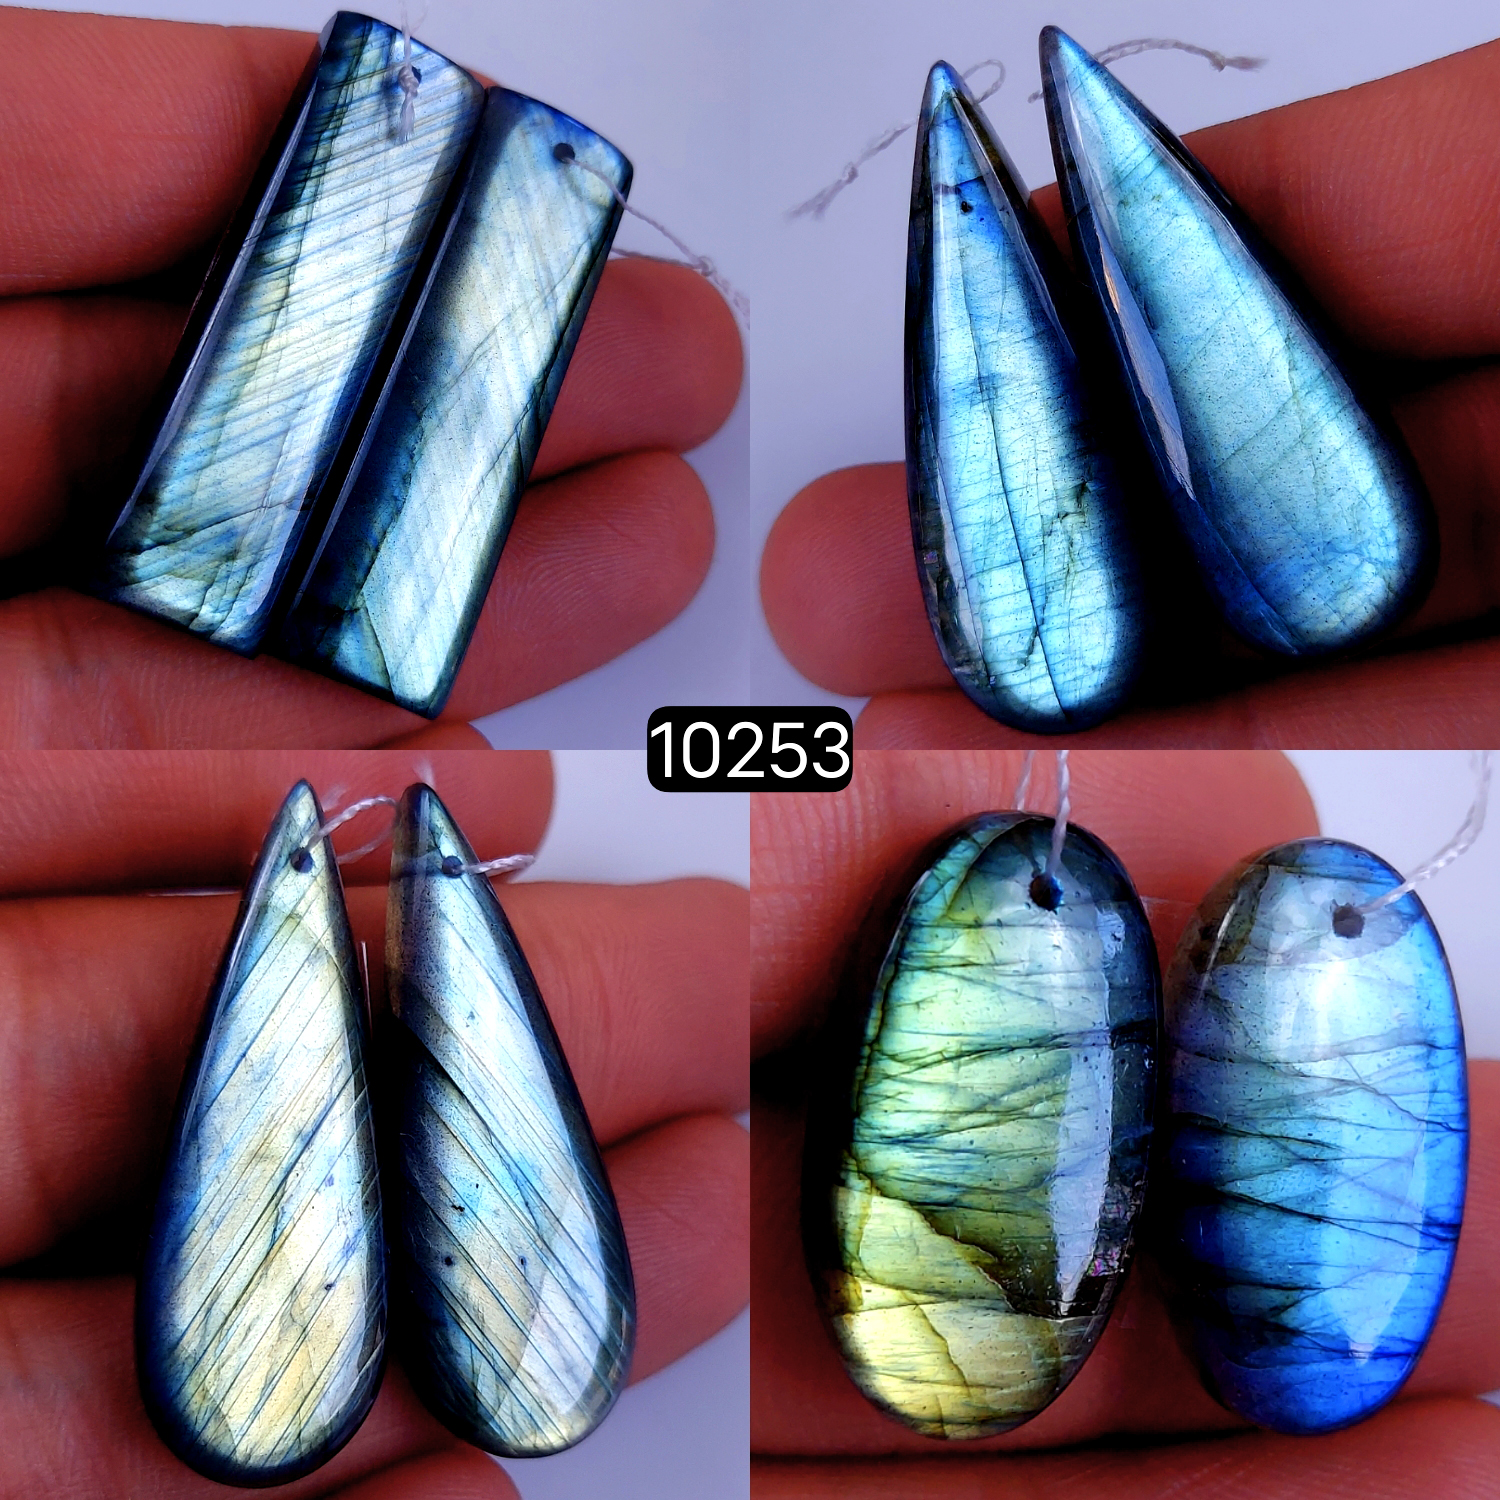 4Pair 210Cts Natural Labradorite Crystal Drill Dangle Drop Earring Pairs Silver Earrings Blue Labradorite Hoop Jewelry  40x12 25x12mm #10253